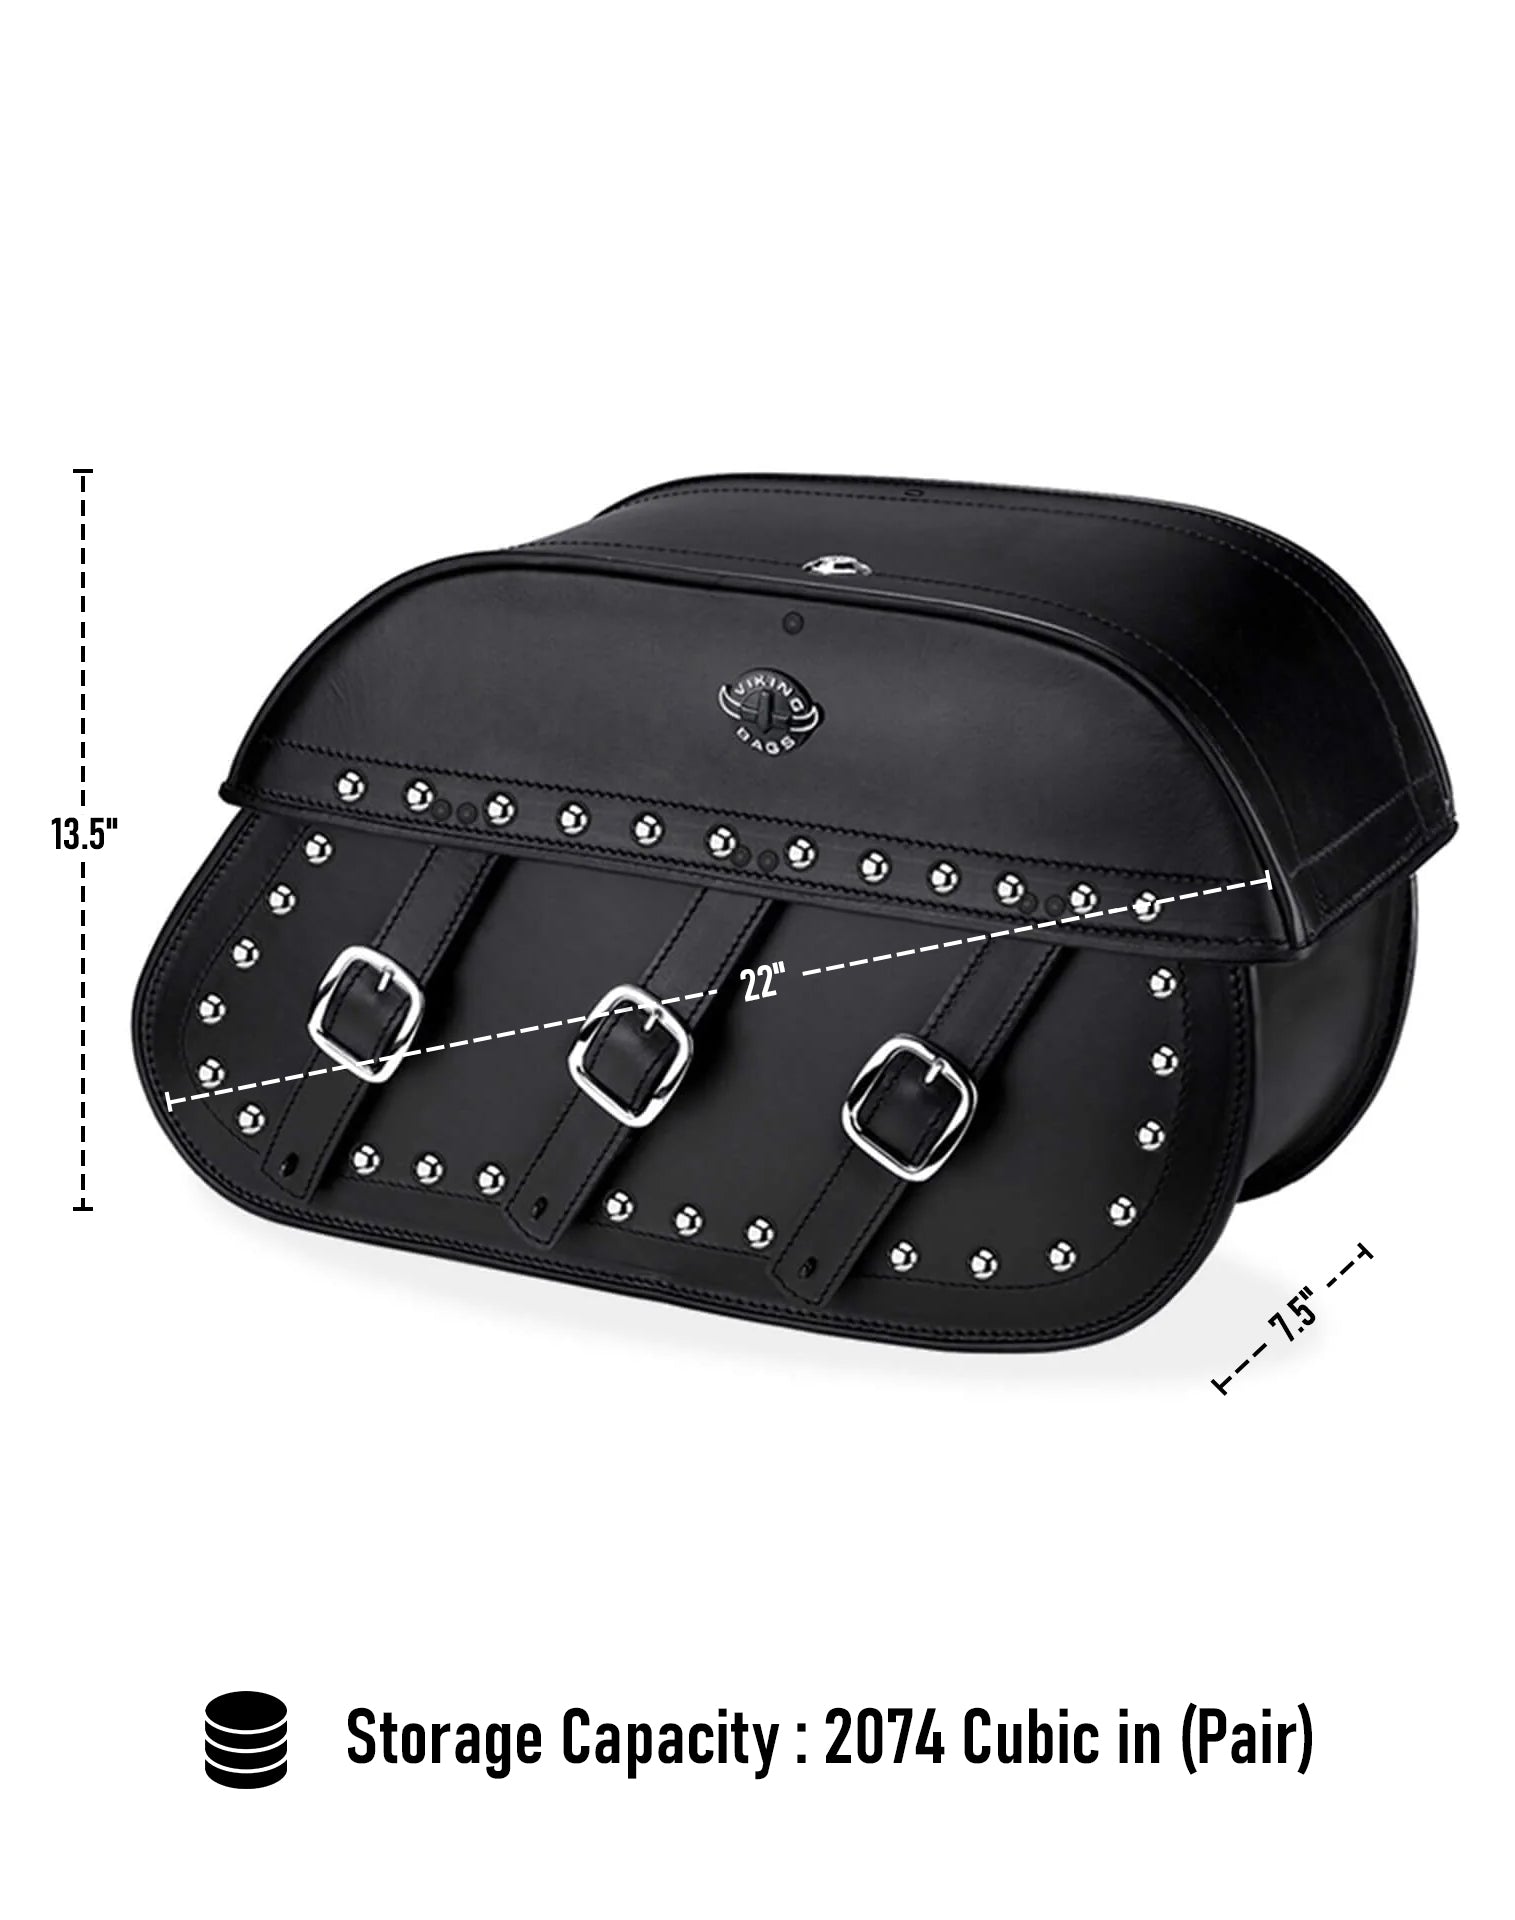 Viking Trianon Extra Large Studded Leather Motorcycle Saddlebags For Harley Softail Breakout Fxsb Can Store Your Ridings Gears